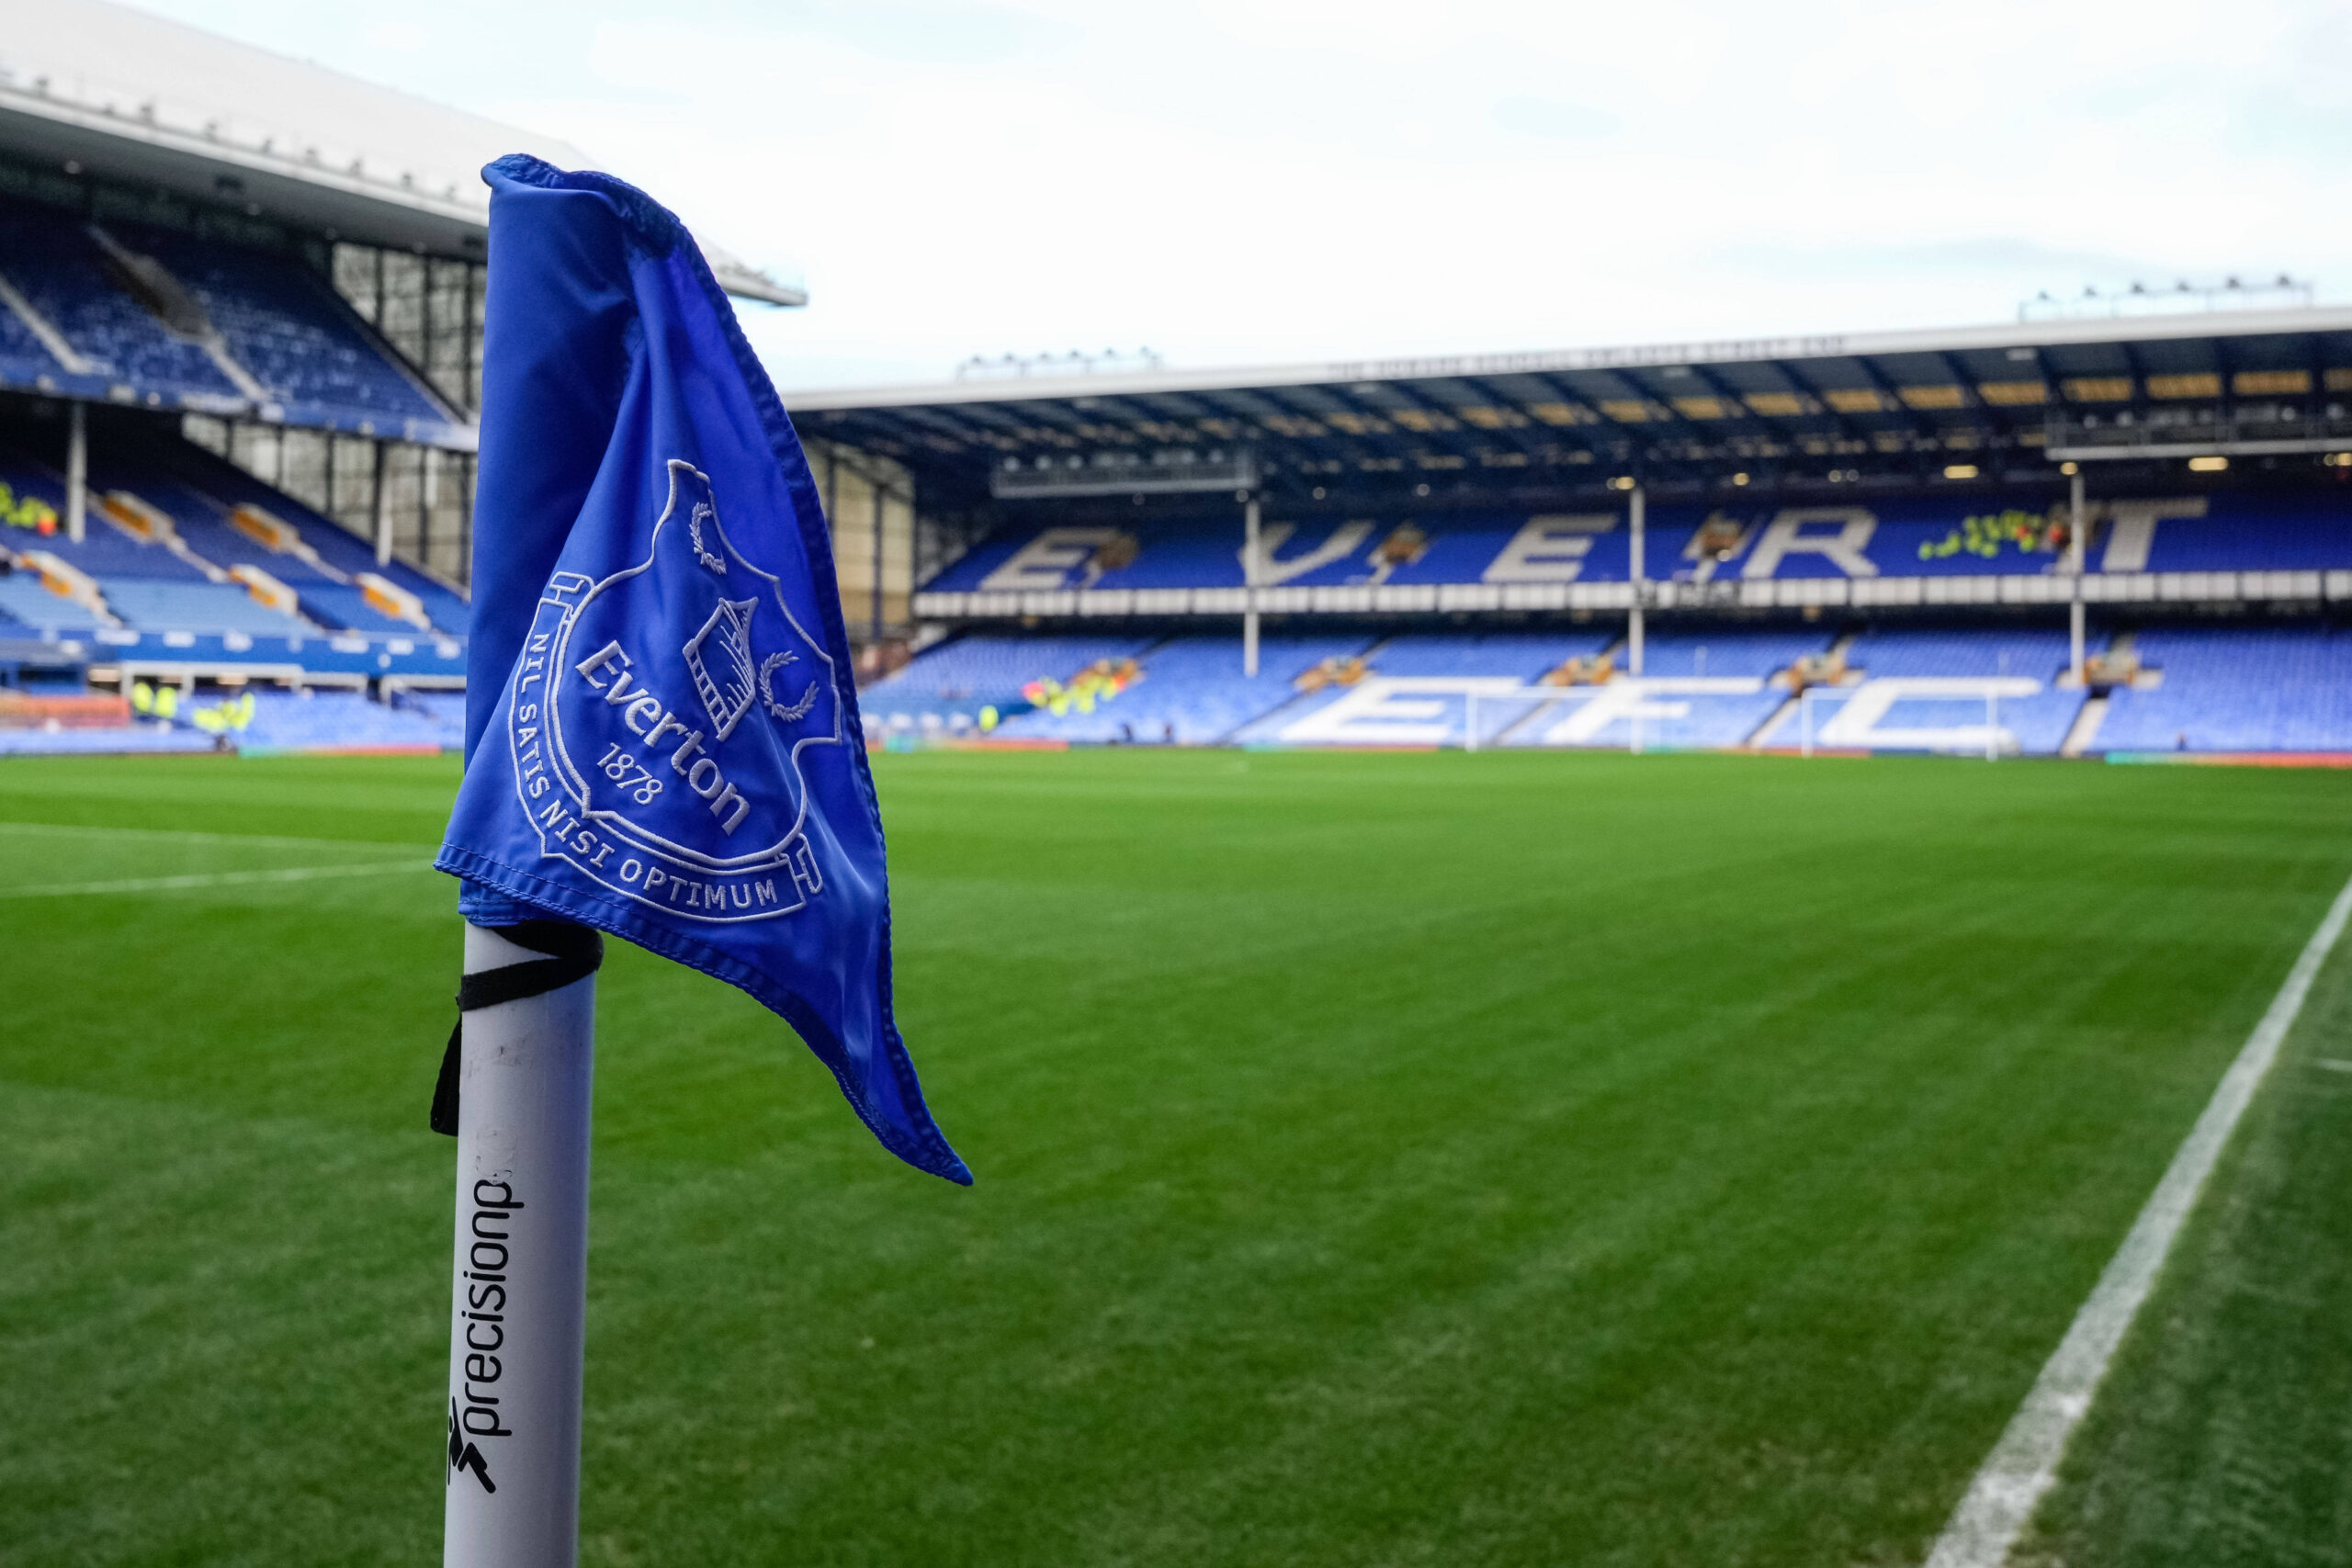 777’s Potential Ownership Of Everton Close To Collapsing